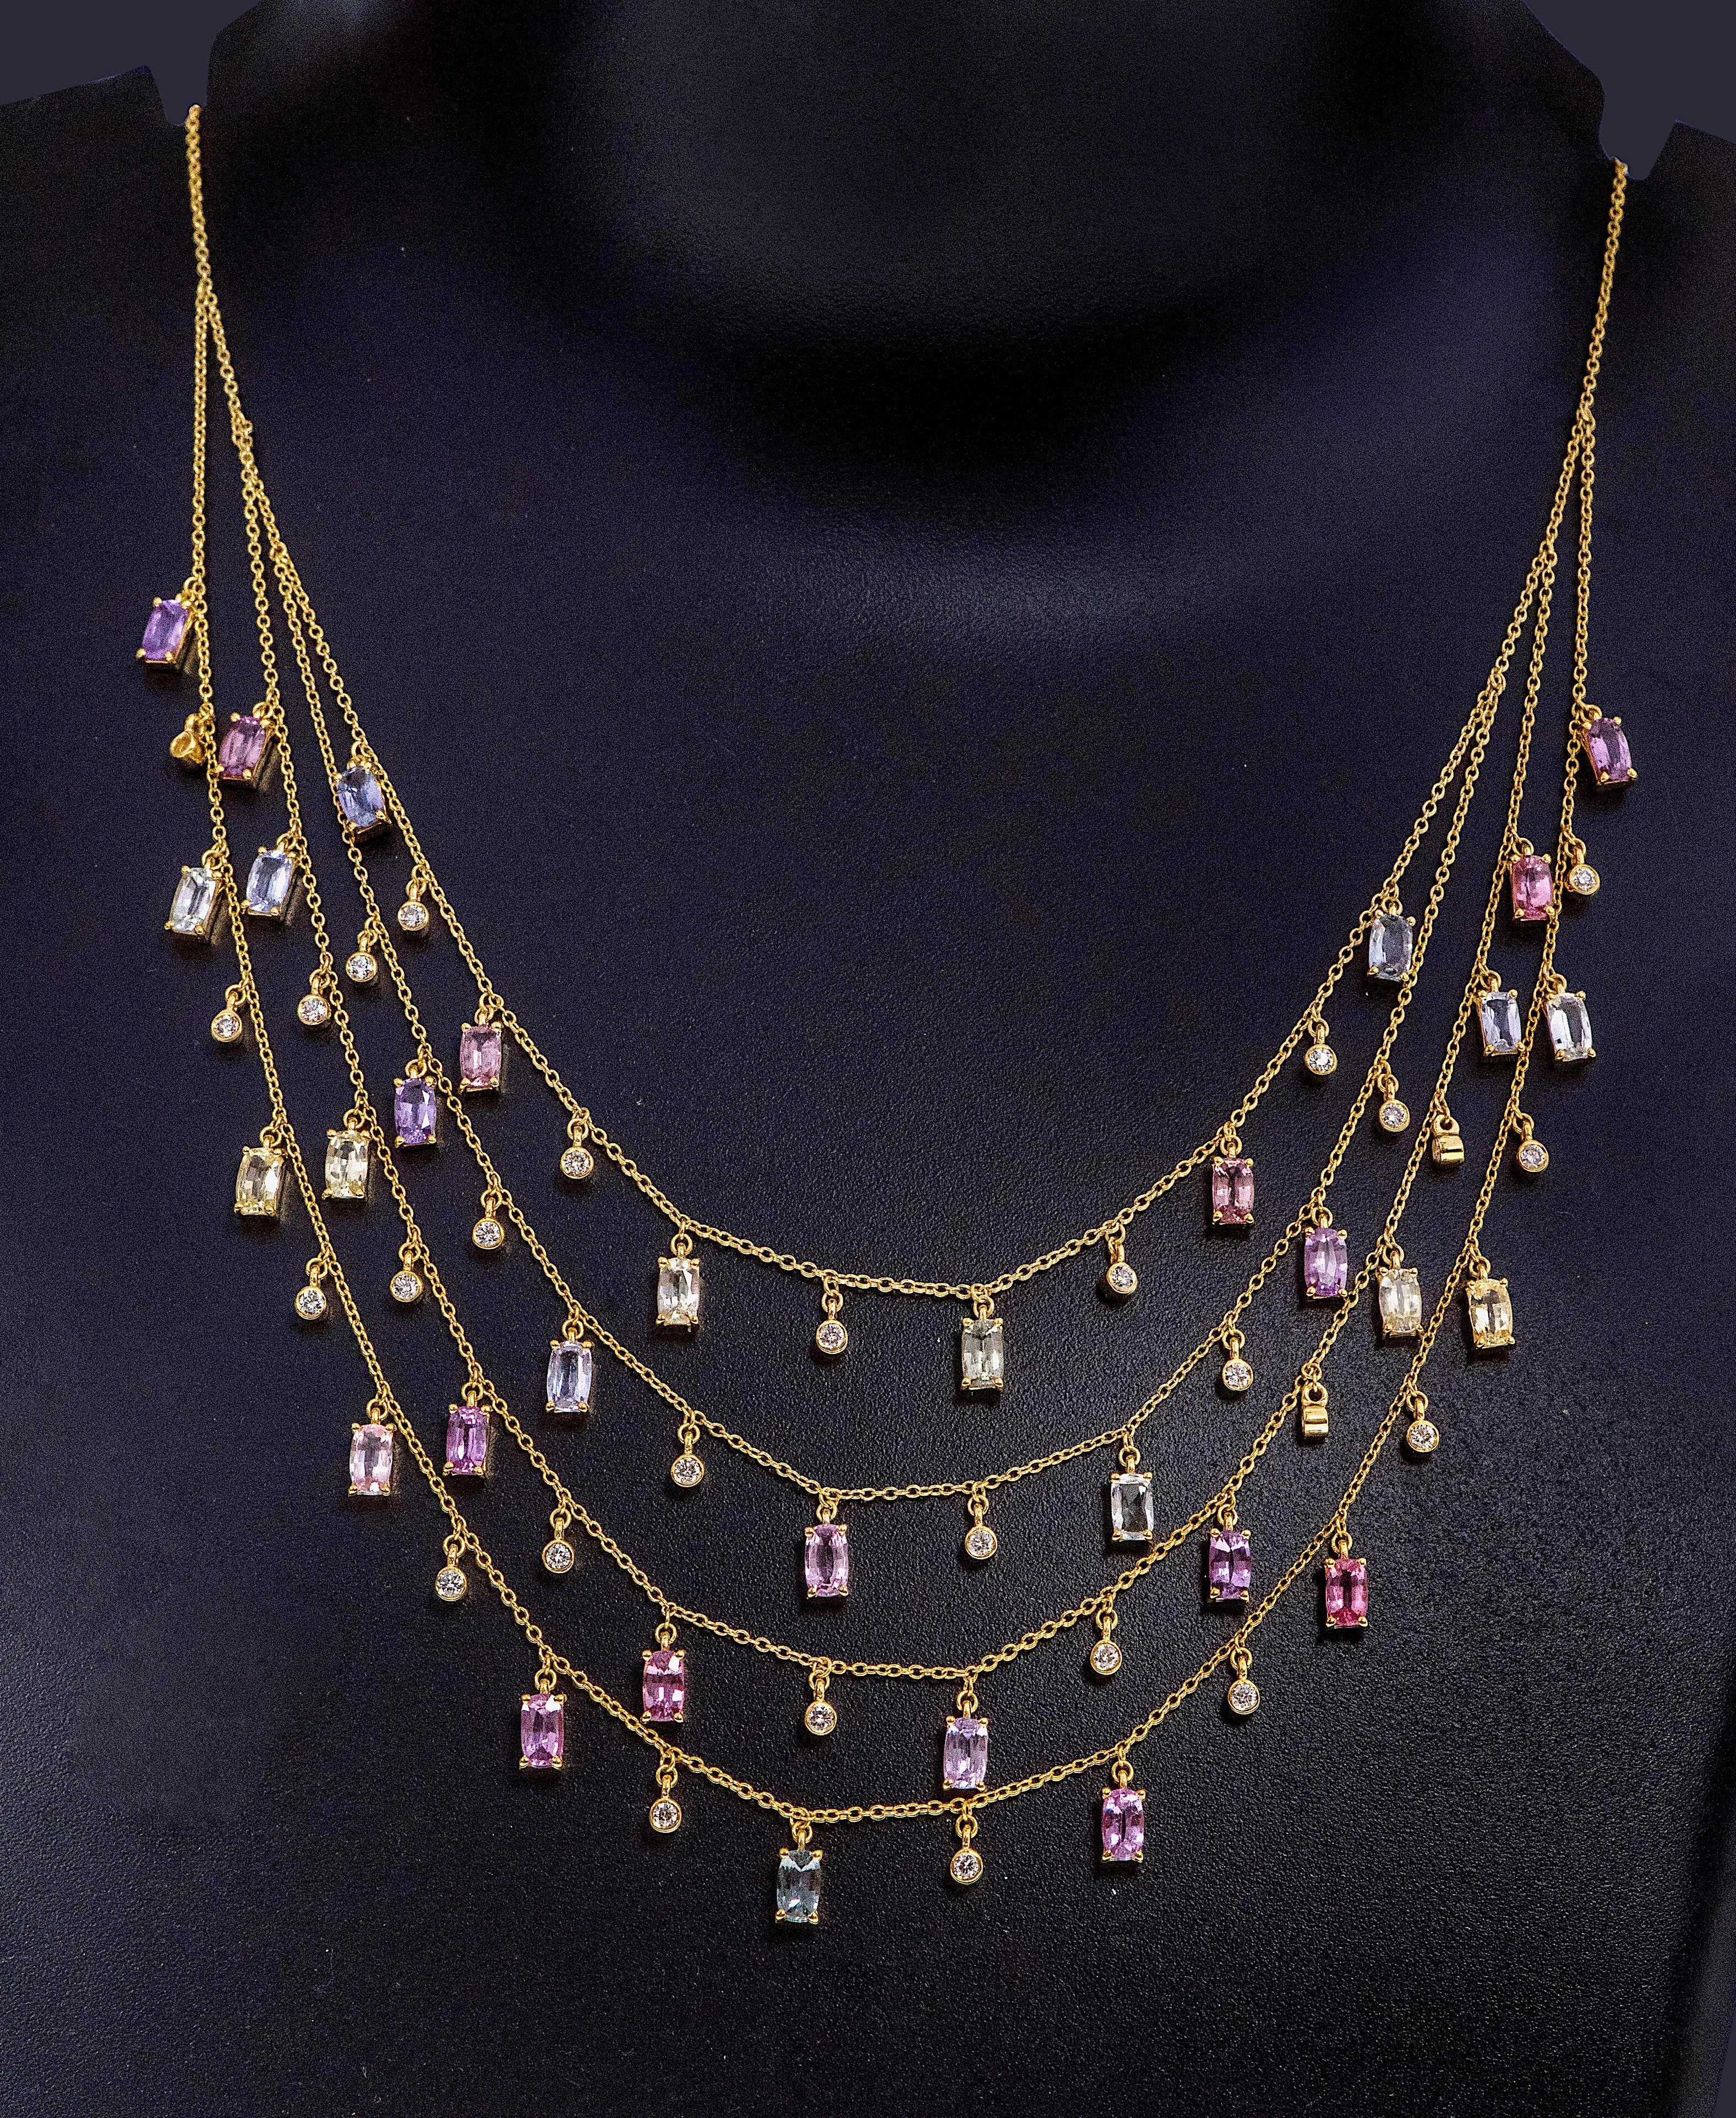 18 Karat Yellow Gold 10.09 Carat Multi-Sapphire and Diamond Multi-Strand Necklace

This exquisite contemporary rainbow multi-sapphire and diamond hanging multi-layer necklace is exemplary. The necklace is designed stylishly with an uneven size of